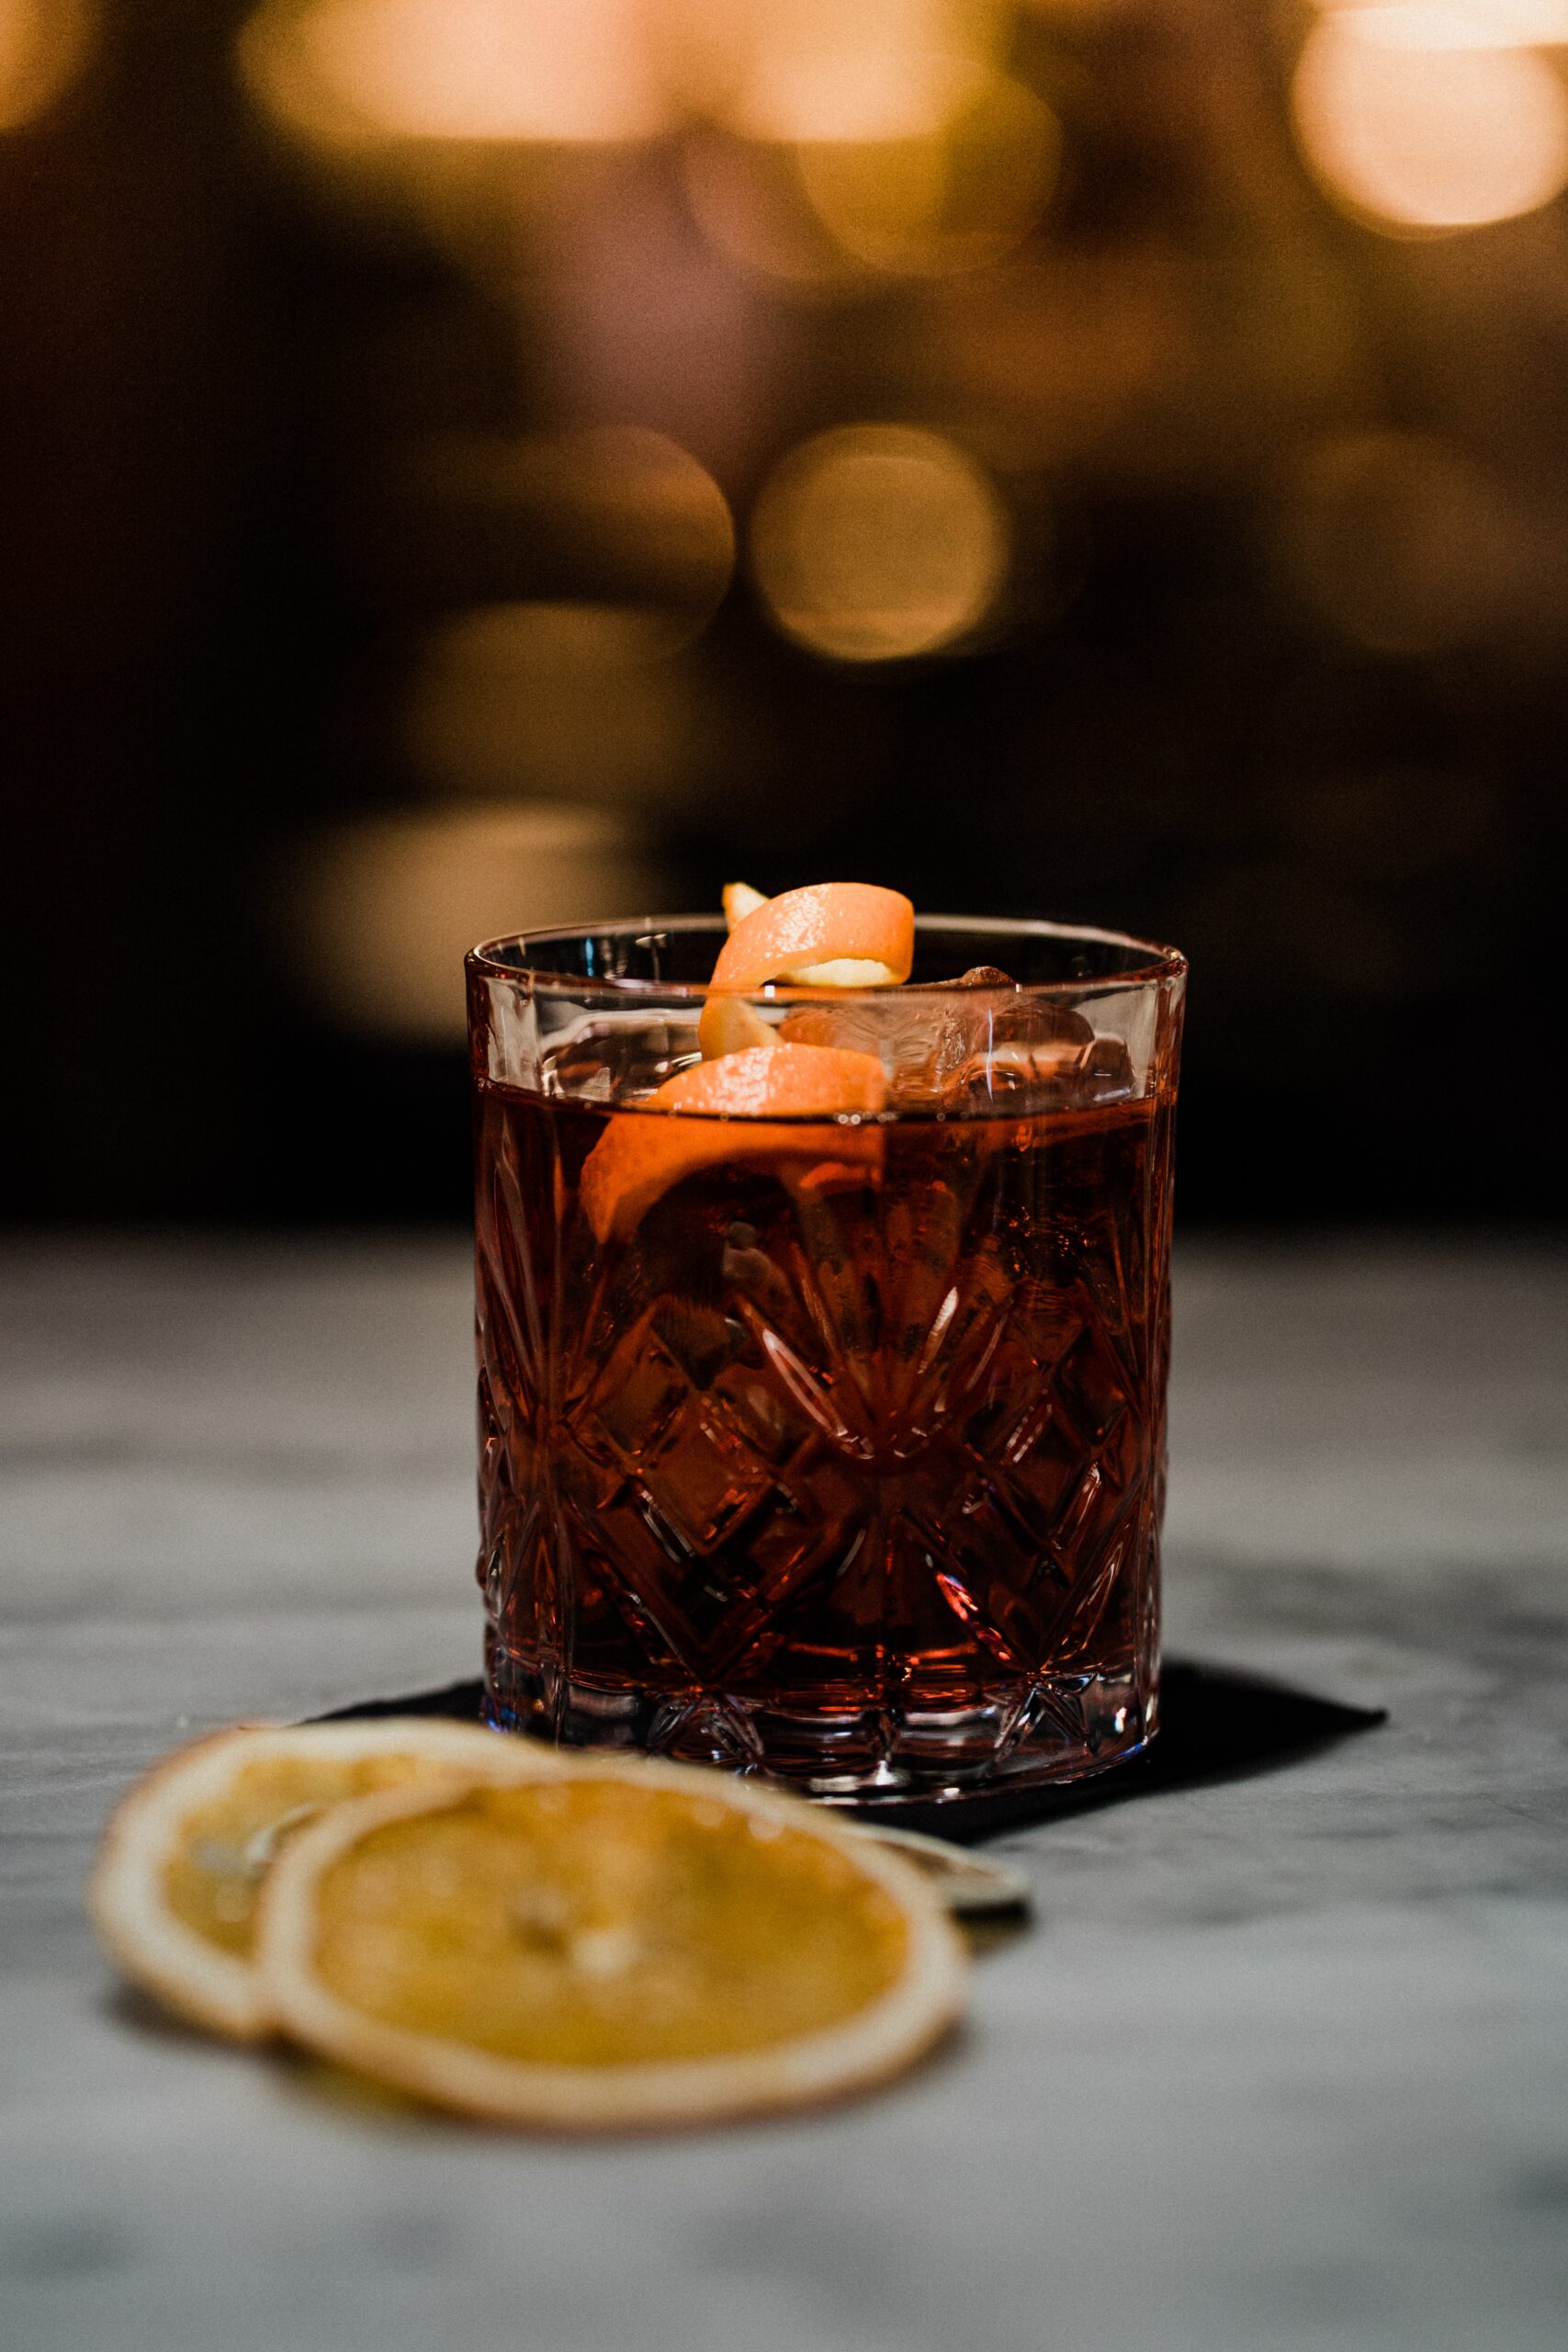 Winter Rum Old Fashioned garnished with an orange peel.